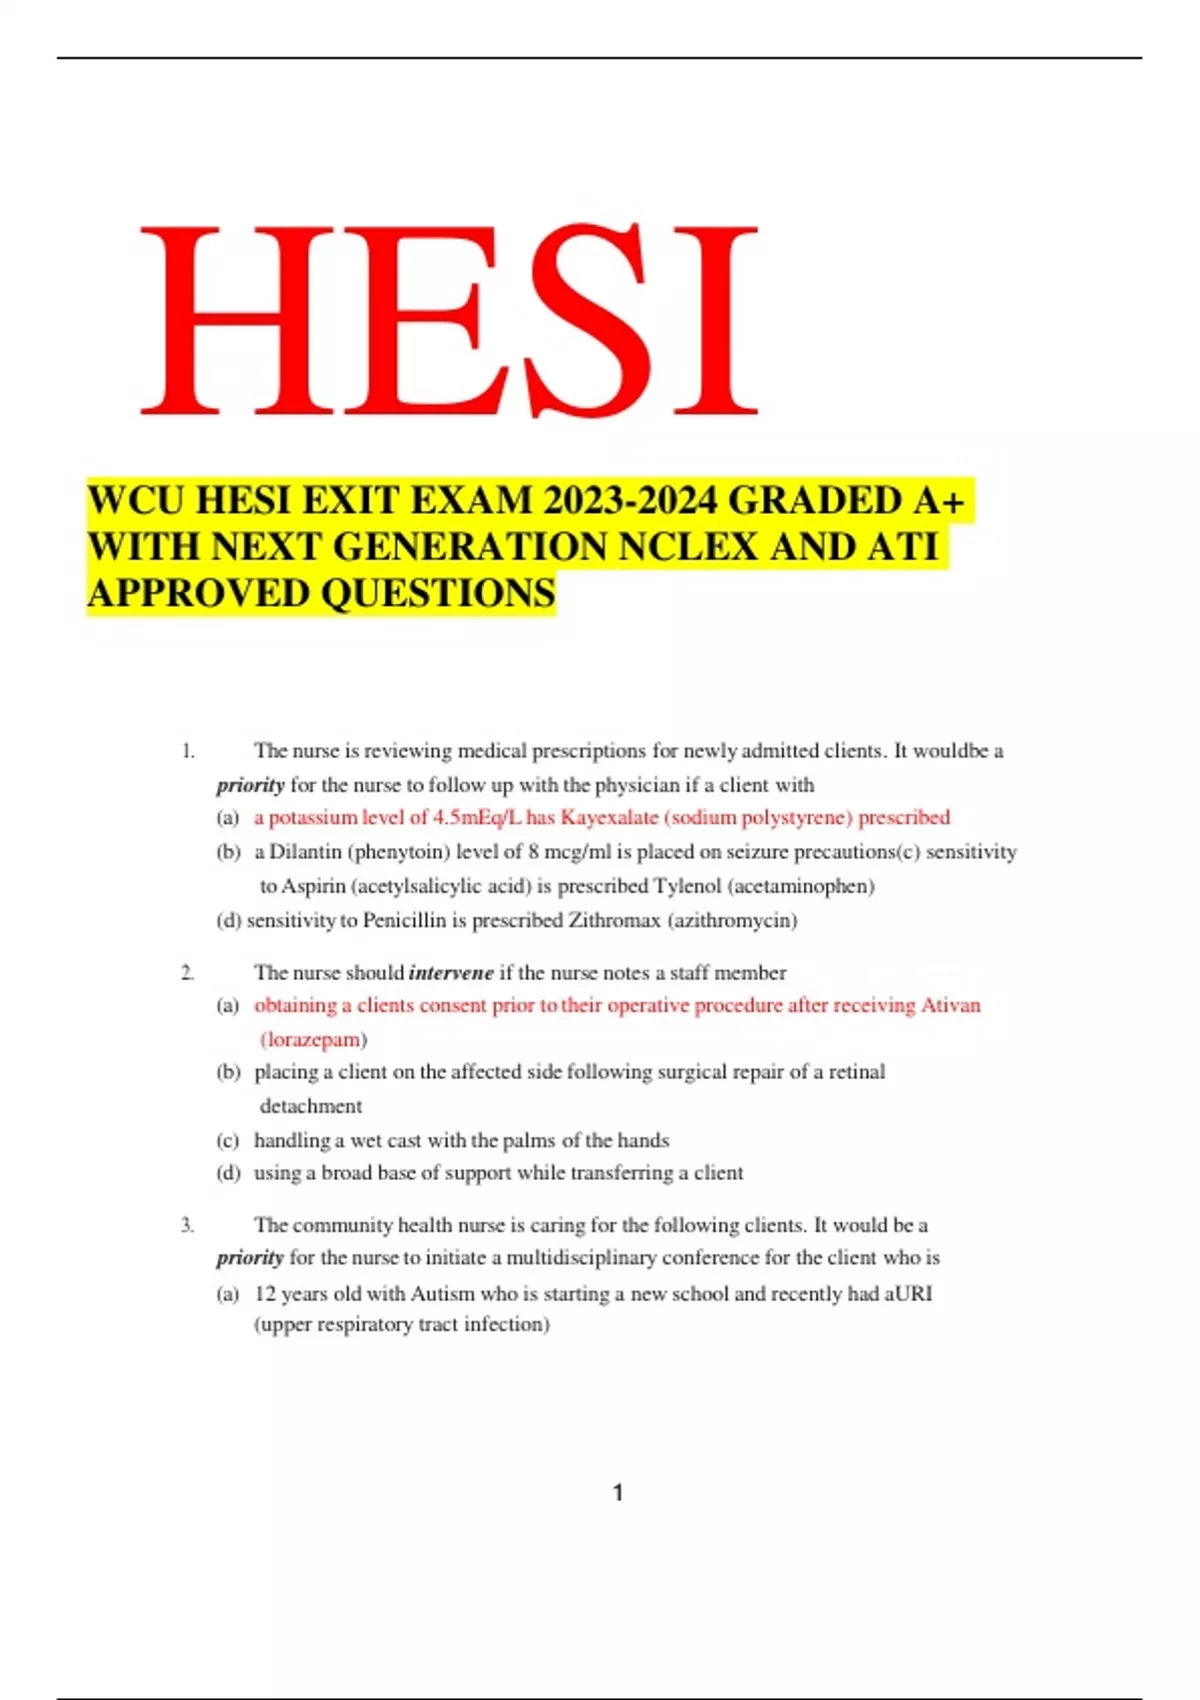 WCU HESI EXIT EXAM GRADED A+ WITH NEXT GENERATION NCLEX AND ATI